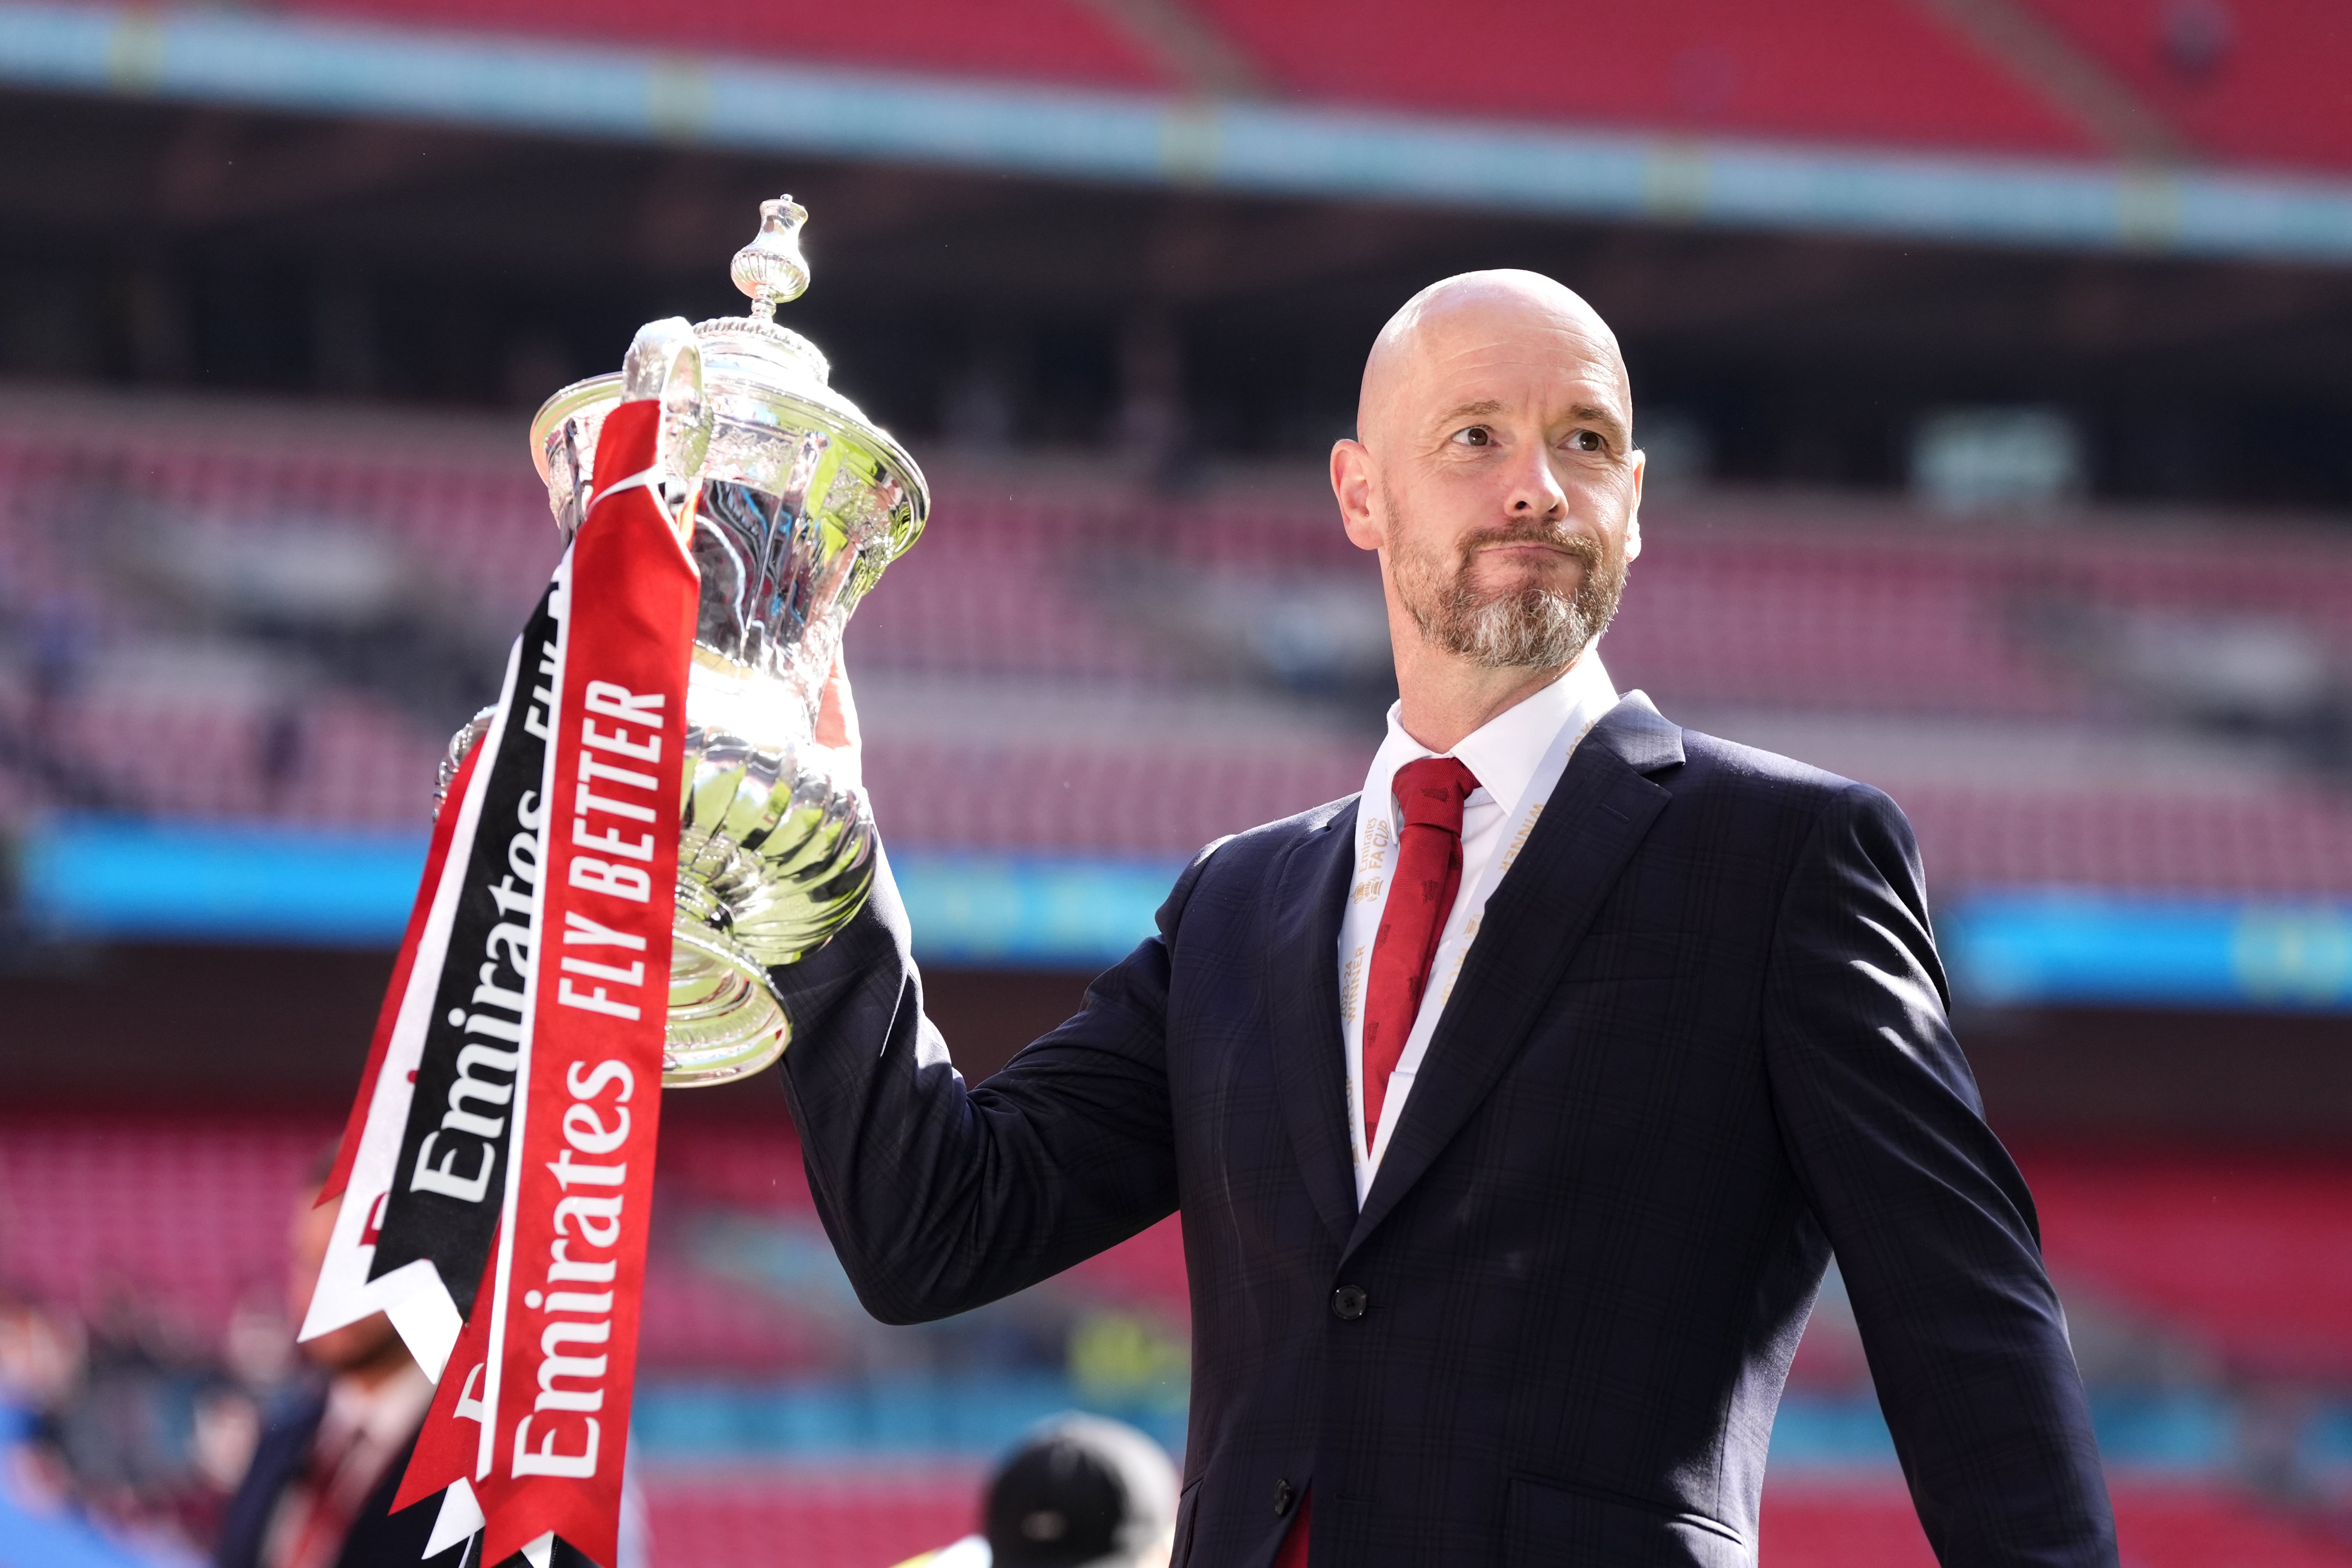 Erik ten Hag was won the Carabao Cup and FA Cup during his time with Manchester United.